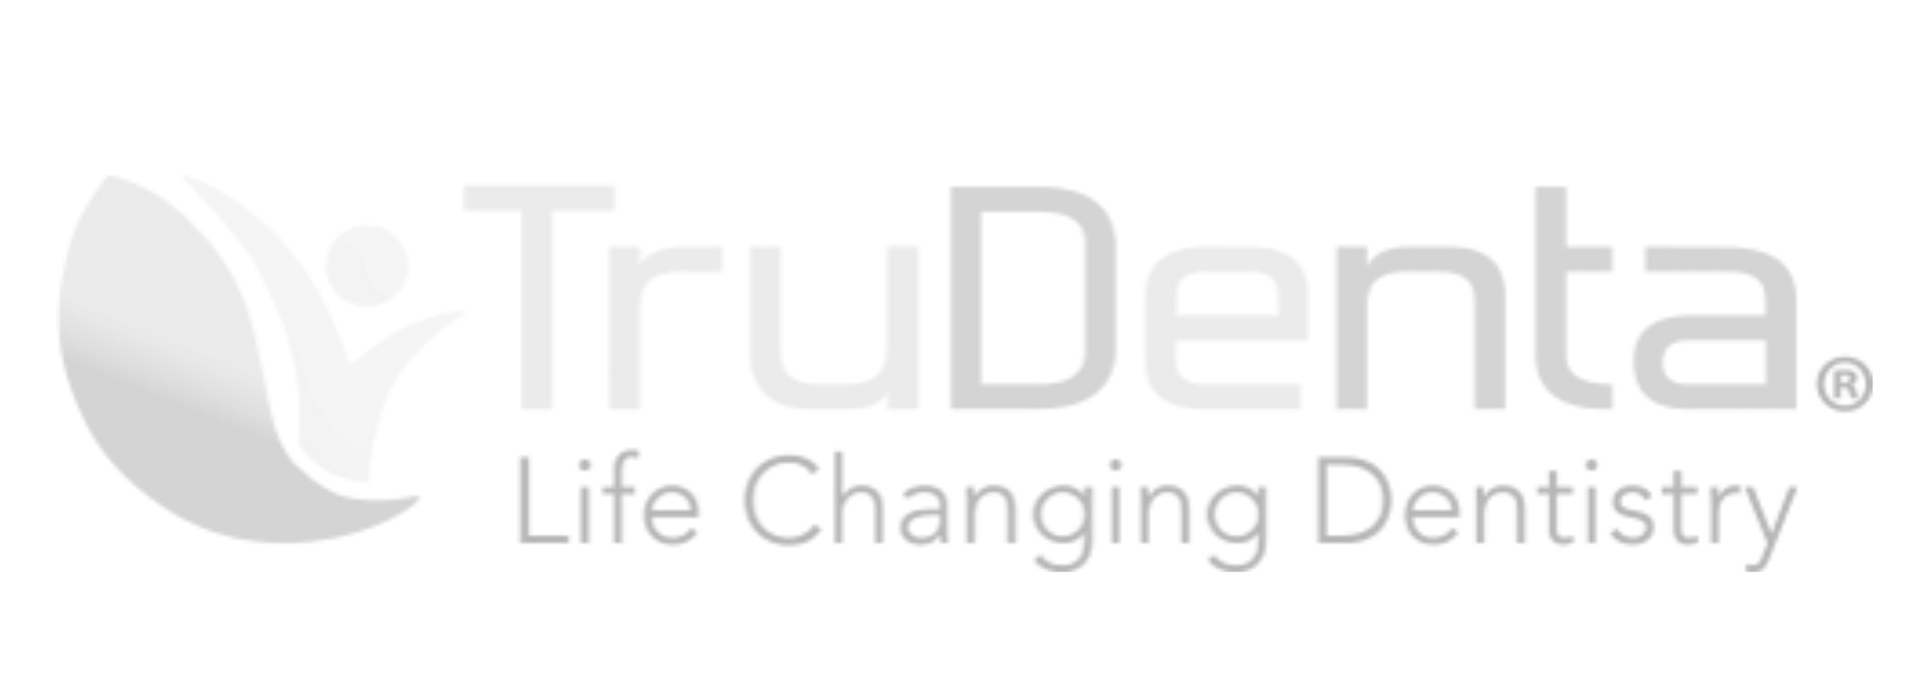 A black and white logo for trudenta life changing dentistry